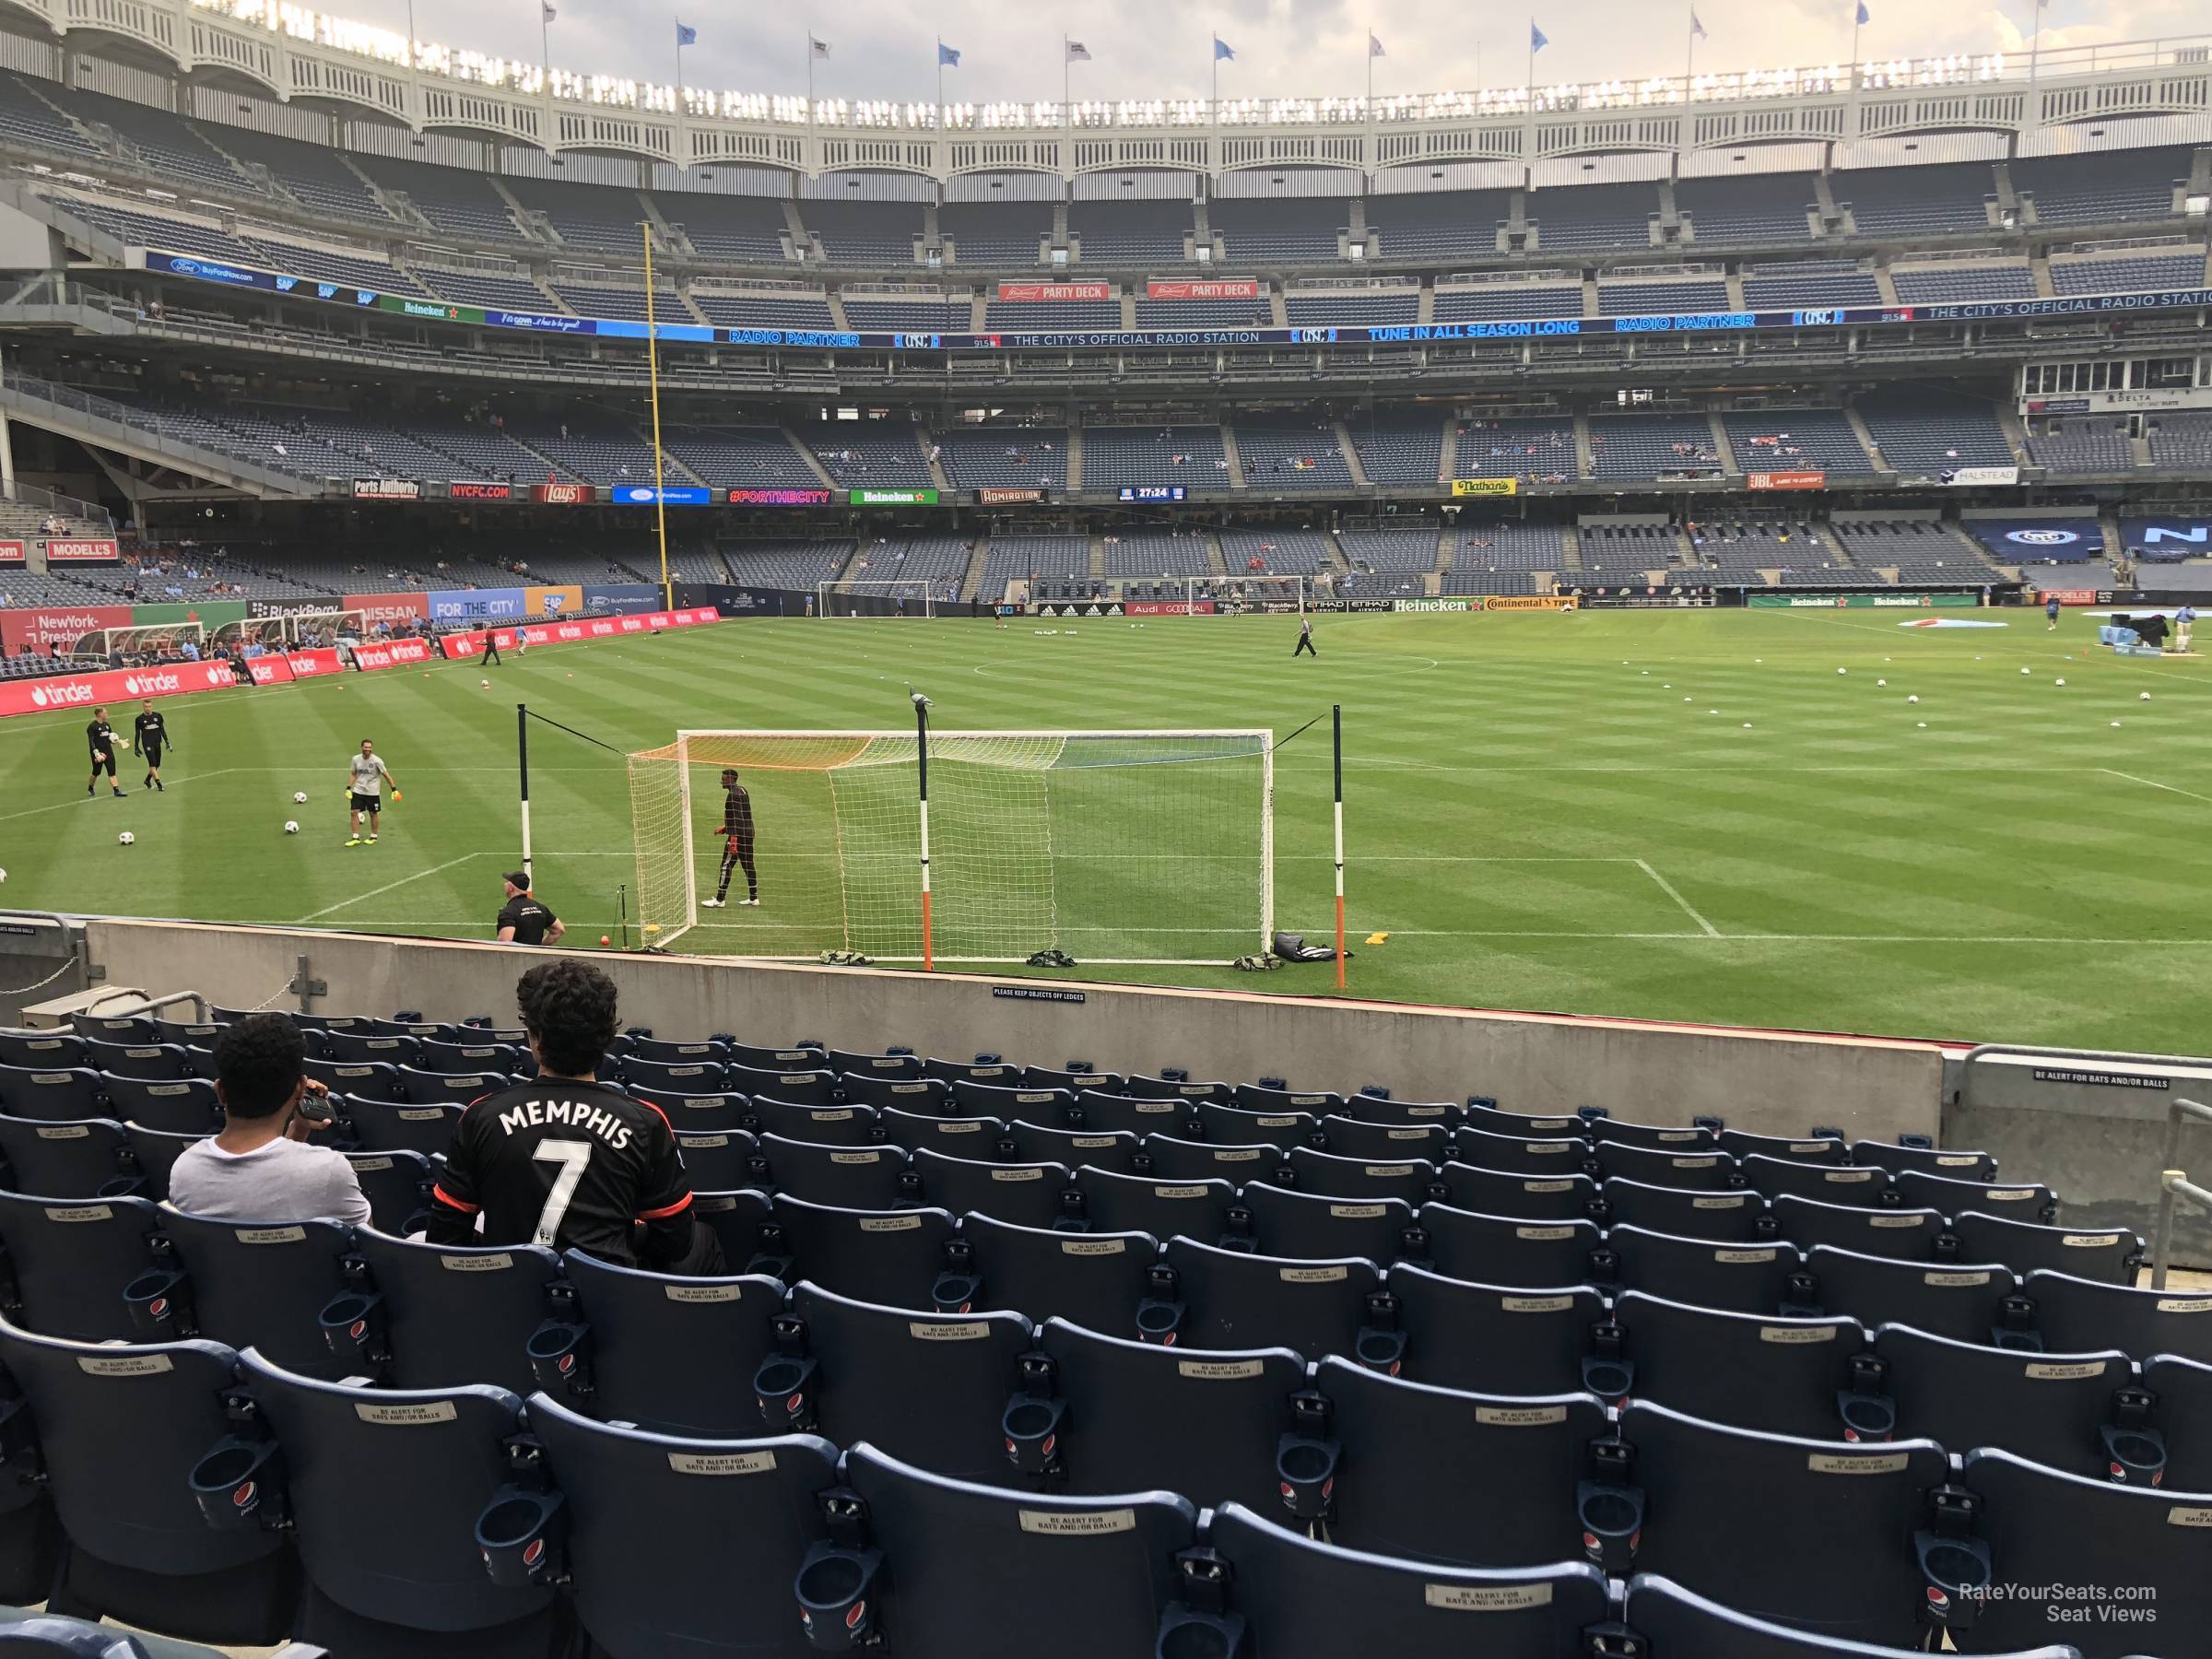 section 135, row 10 seat view  for soccer - yankee stadium